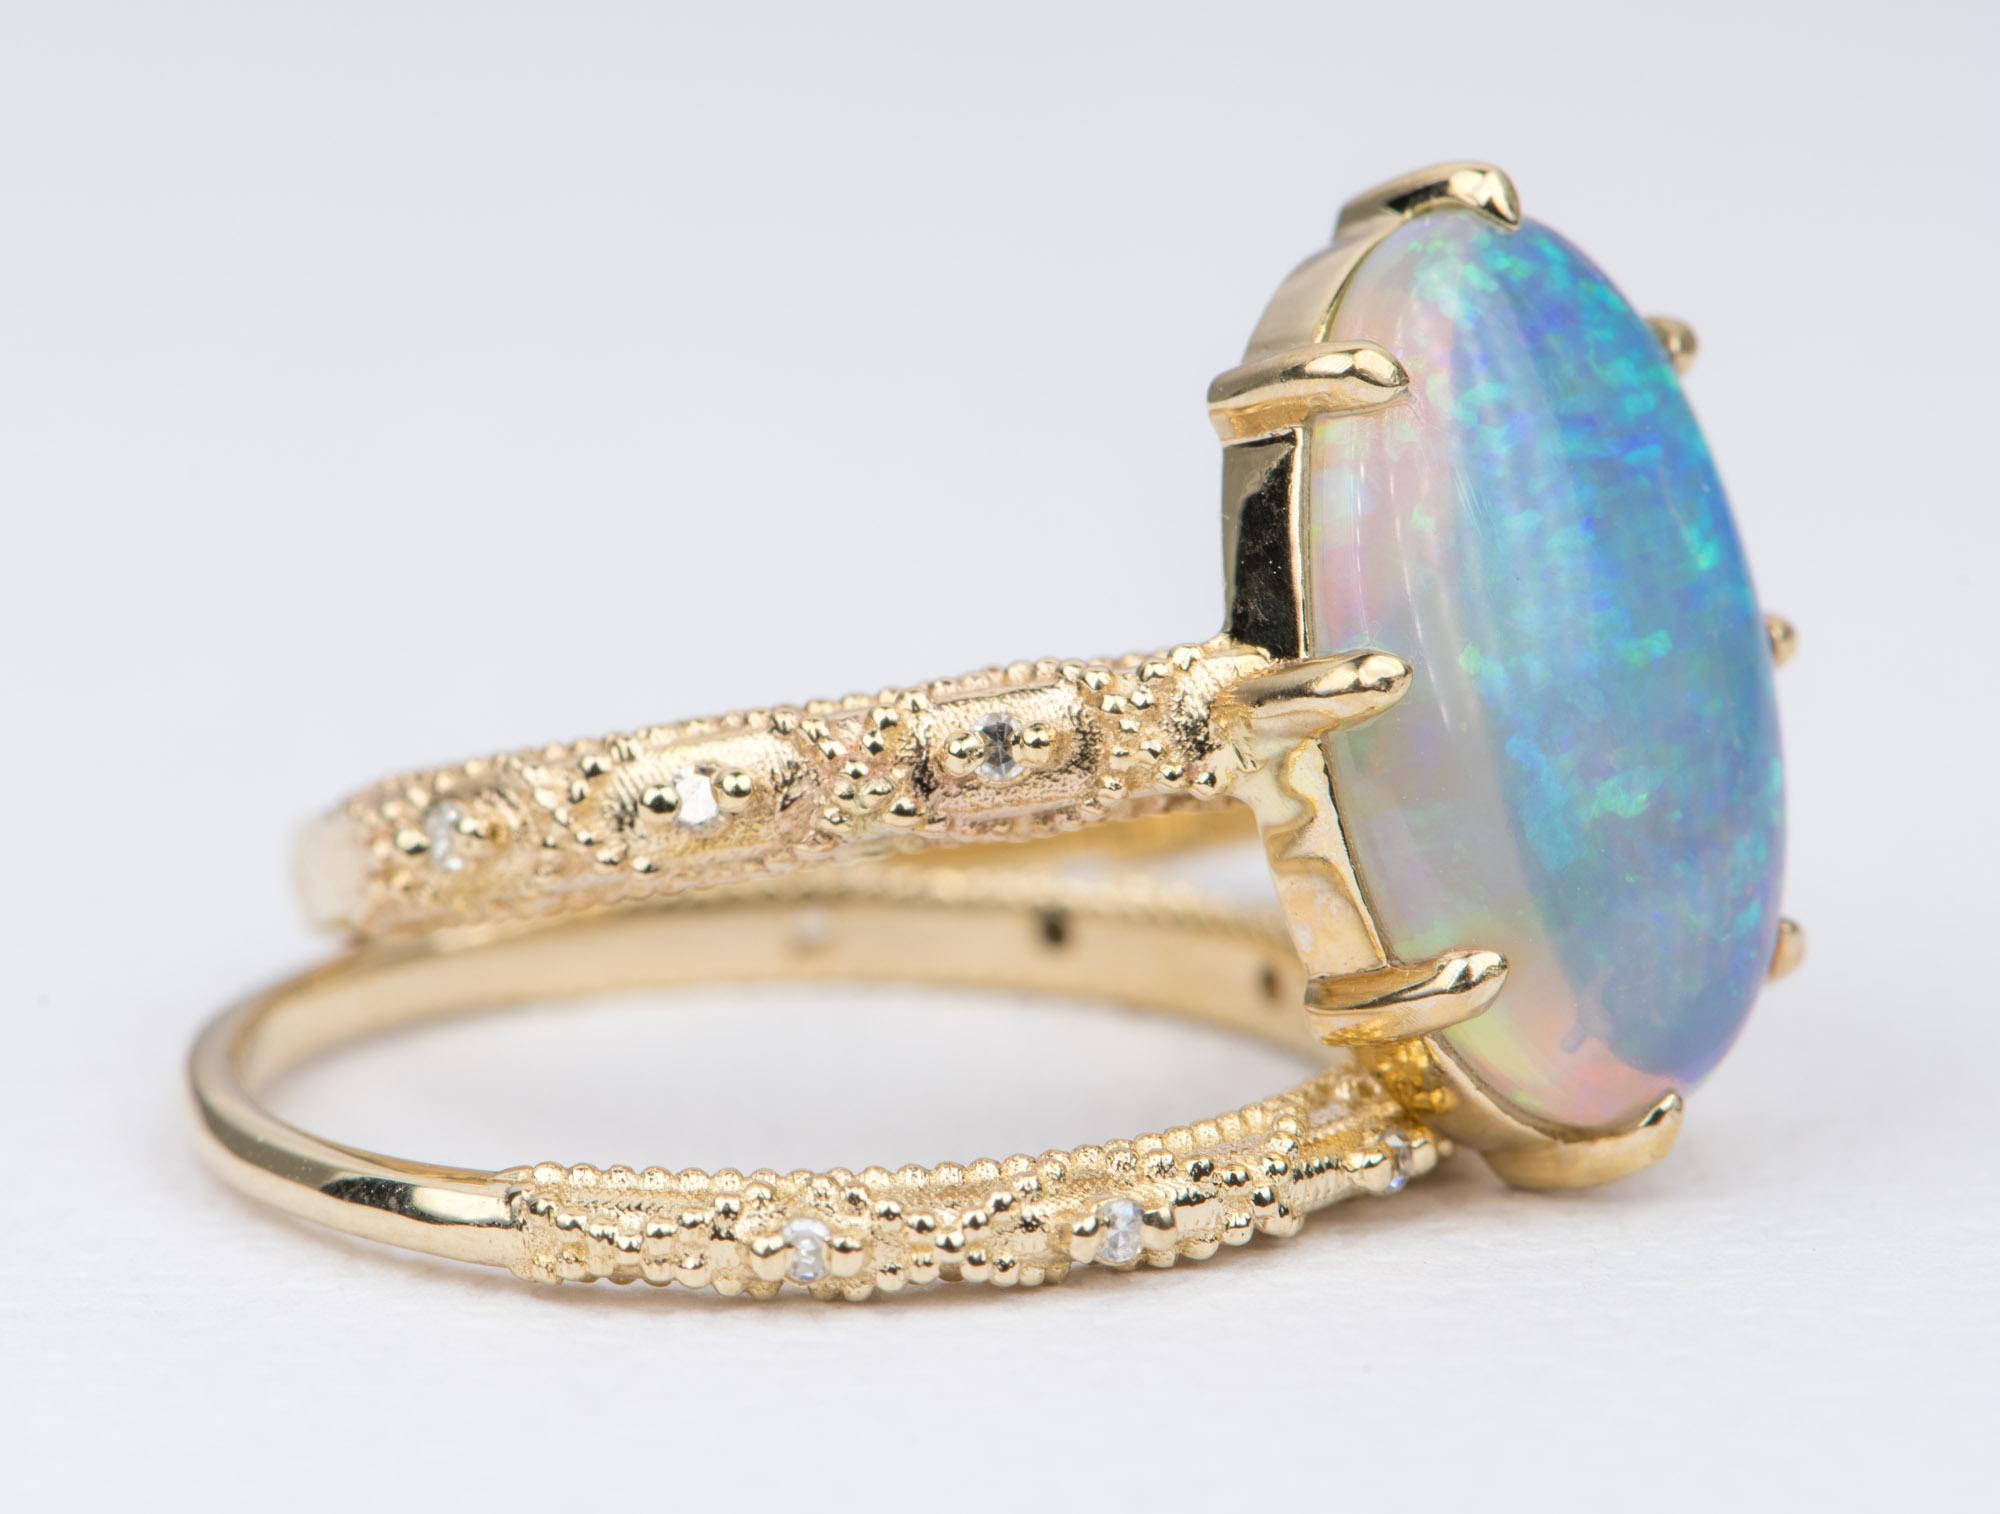 ♥♥♥♥ This listing is sold and priced as a set ♥♥��♥♥

♥  A solid 14k yellow gold ring set with a beautiful oval shape Australian opal, set on a vintage-inspired lace filigree band to accent the center stone 
♥  The engagement ring is paired with a